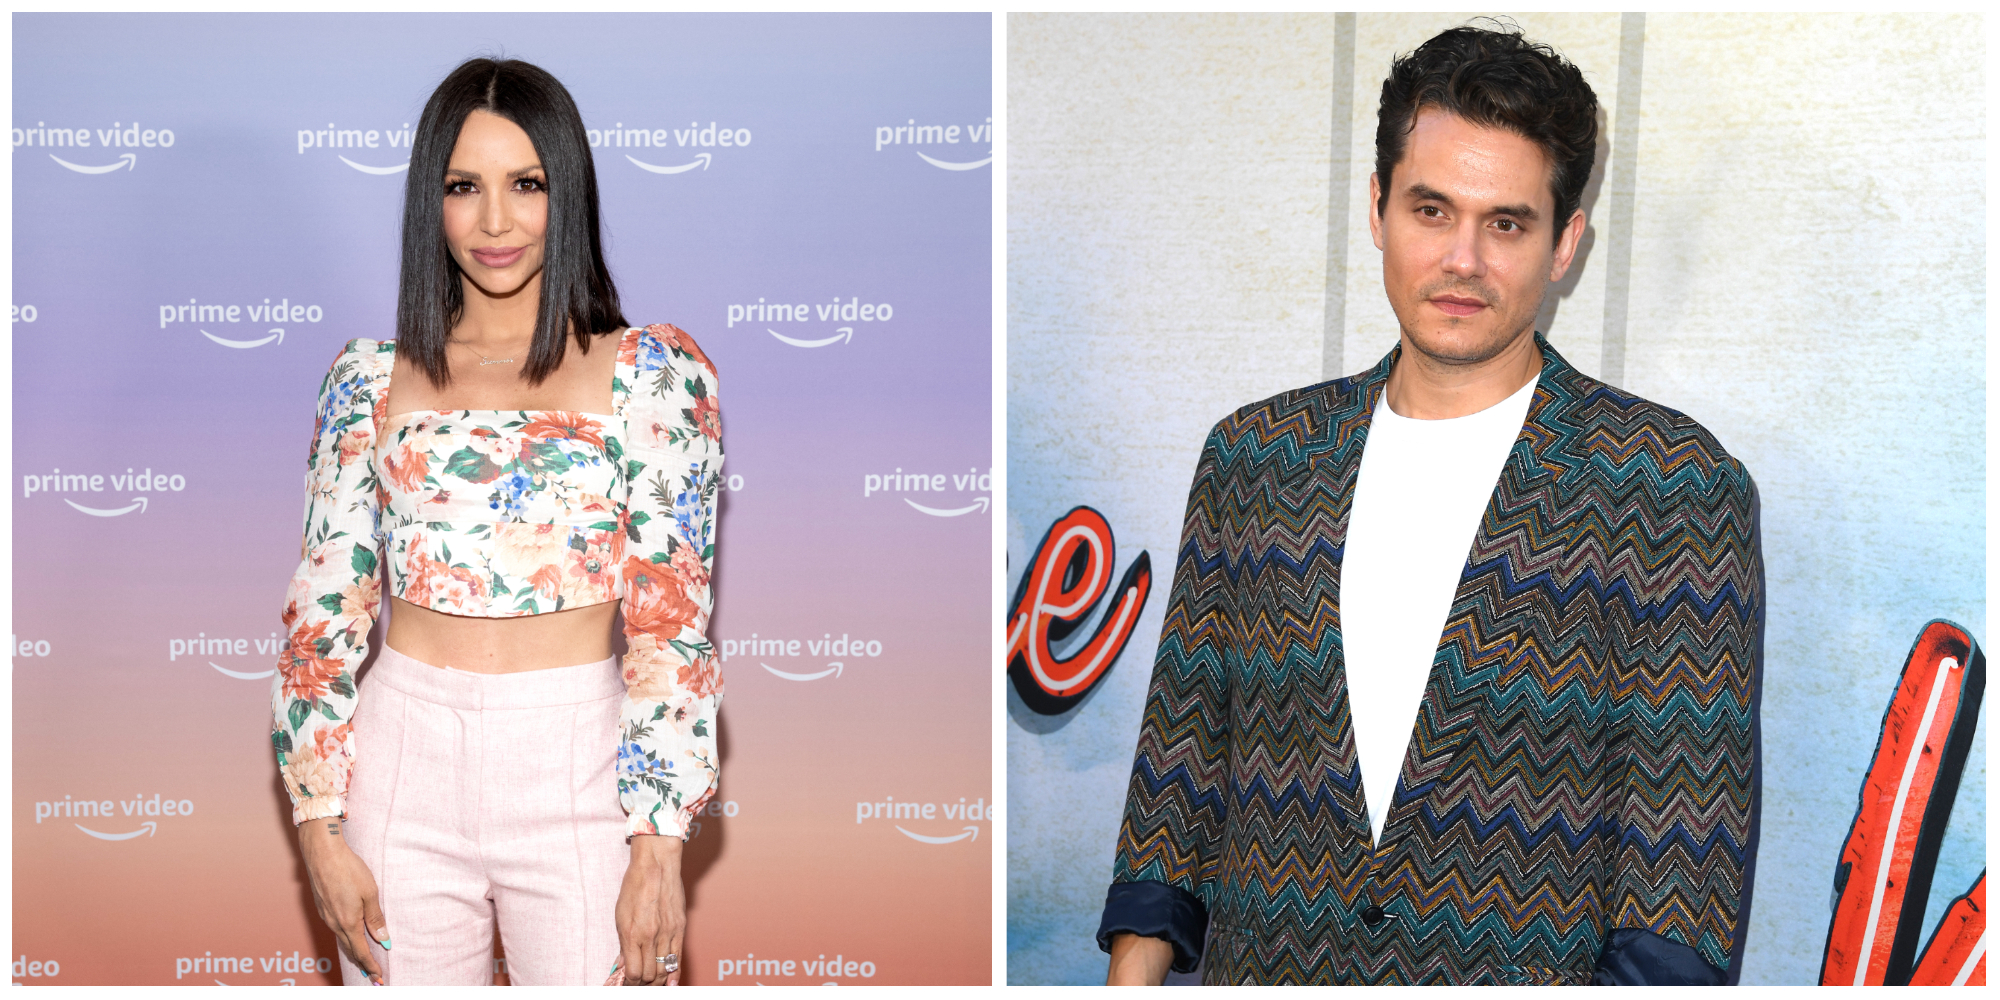 Scheana Shay and John Mayer on a red carpet 